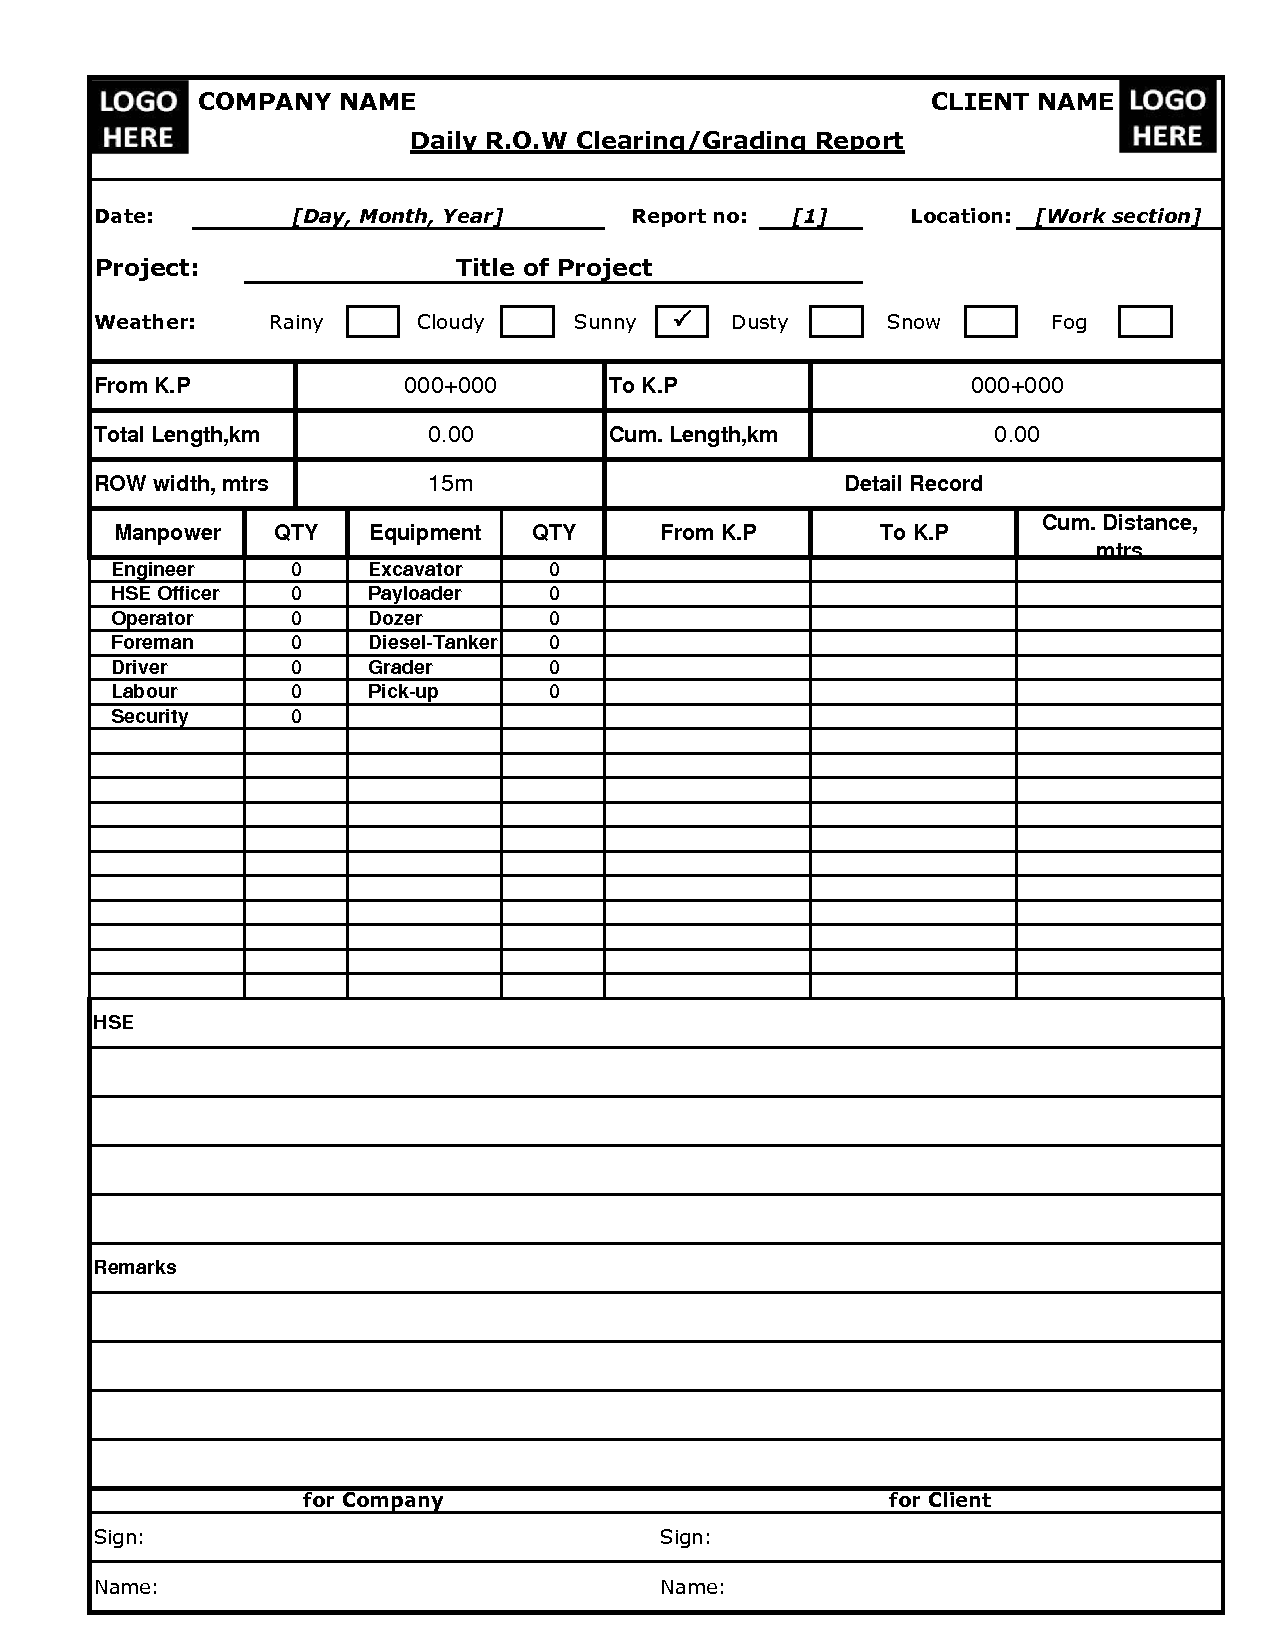 Simple Daily Progress Report Format Excel Construction To Daily Progress Report Format Excel Construction For Google Sheet